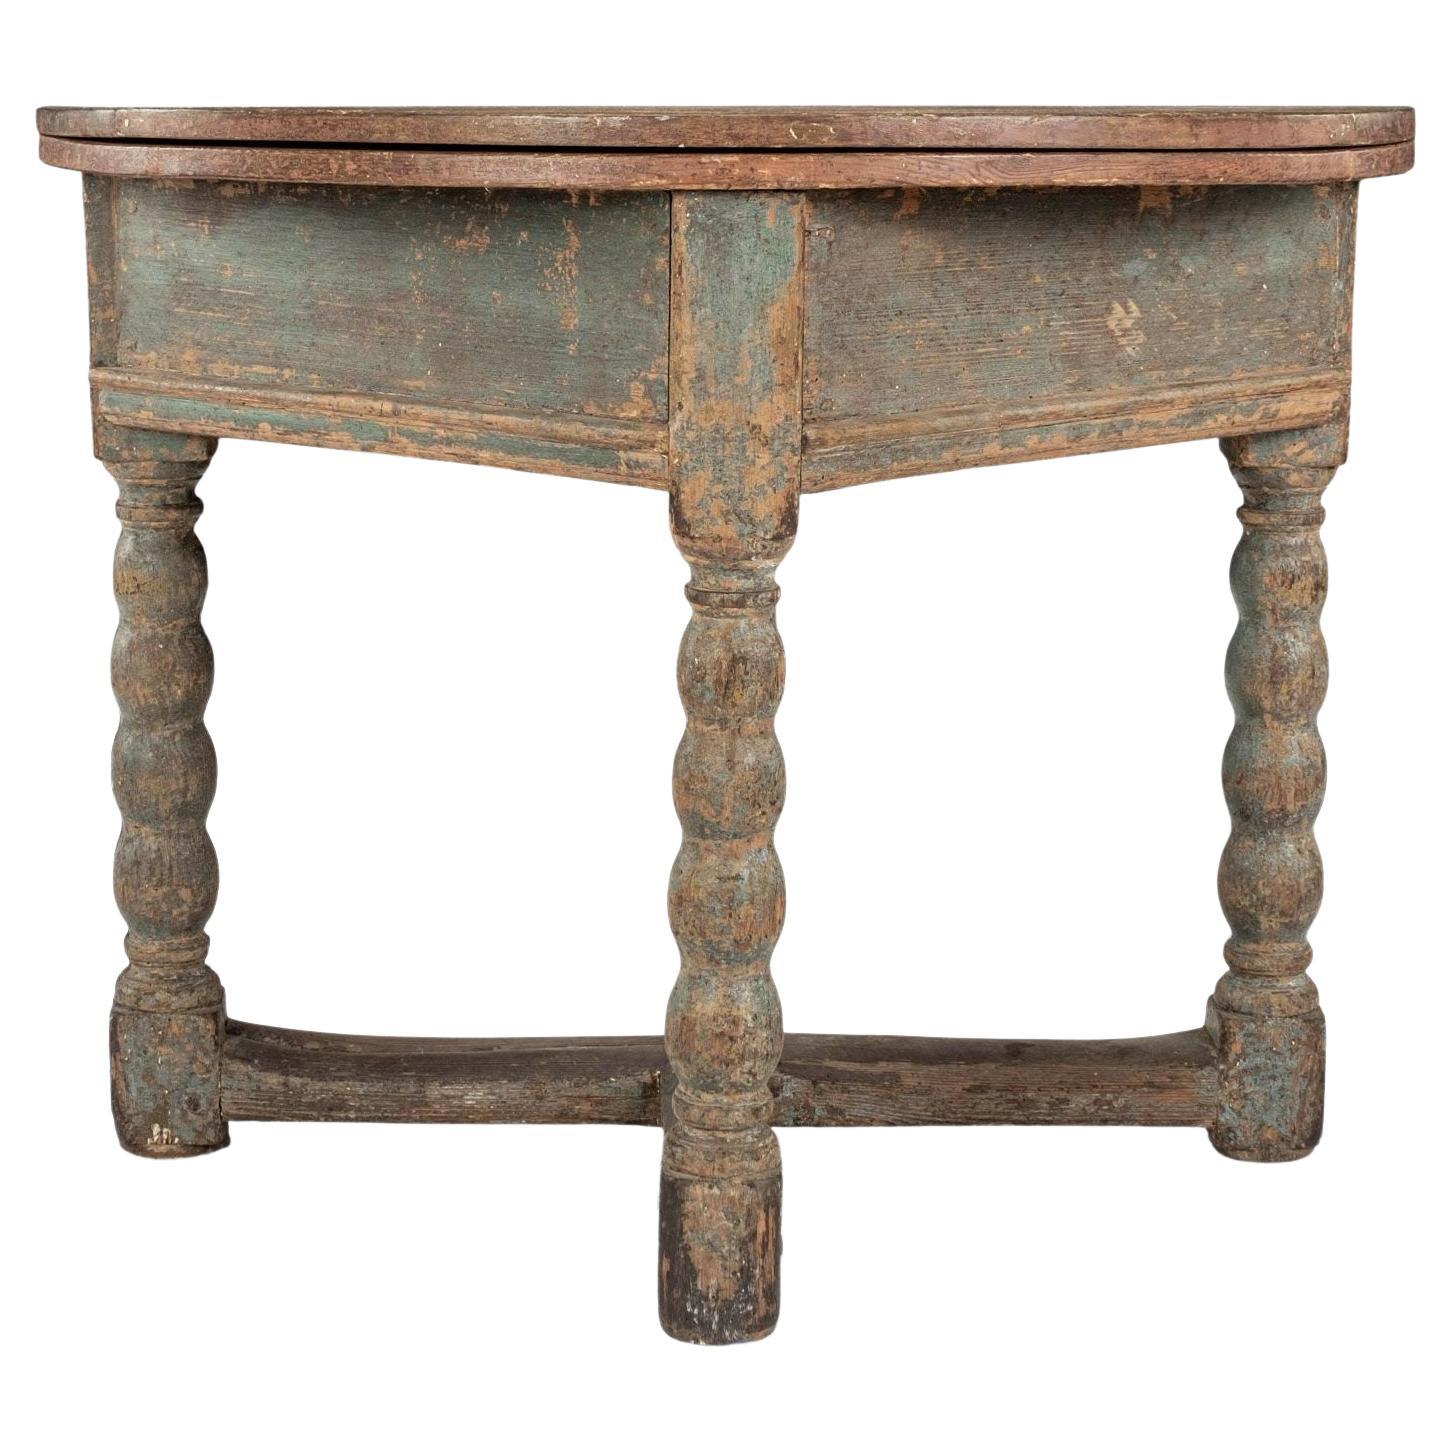 Painted Baroque Swedish Demilune Fold-Over Table For Sale